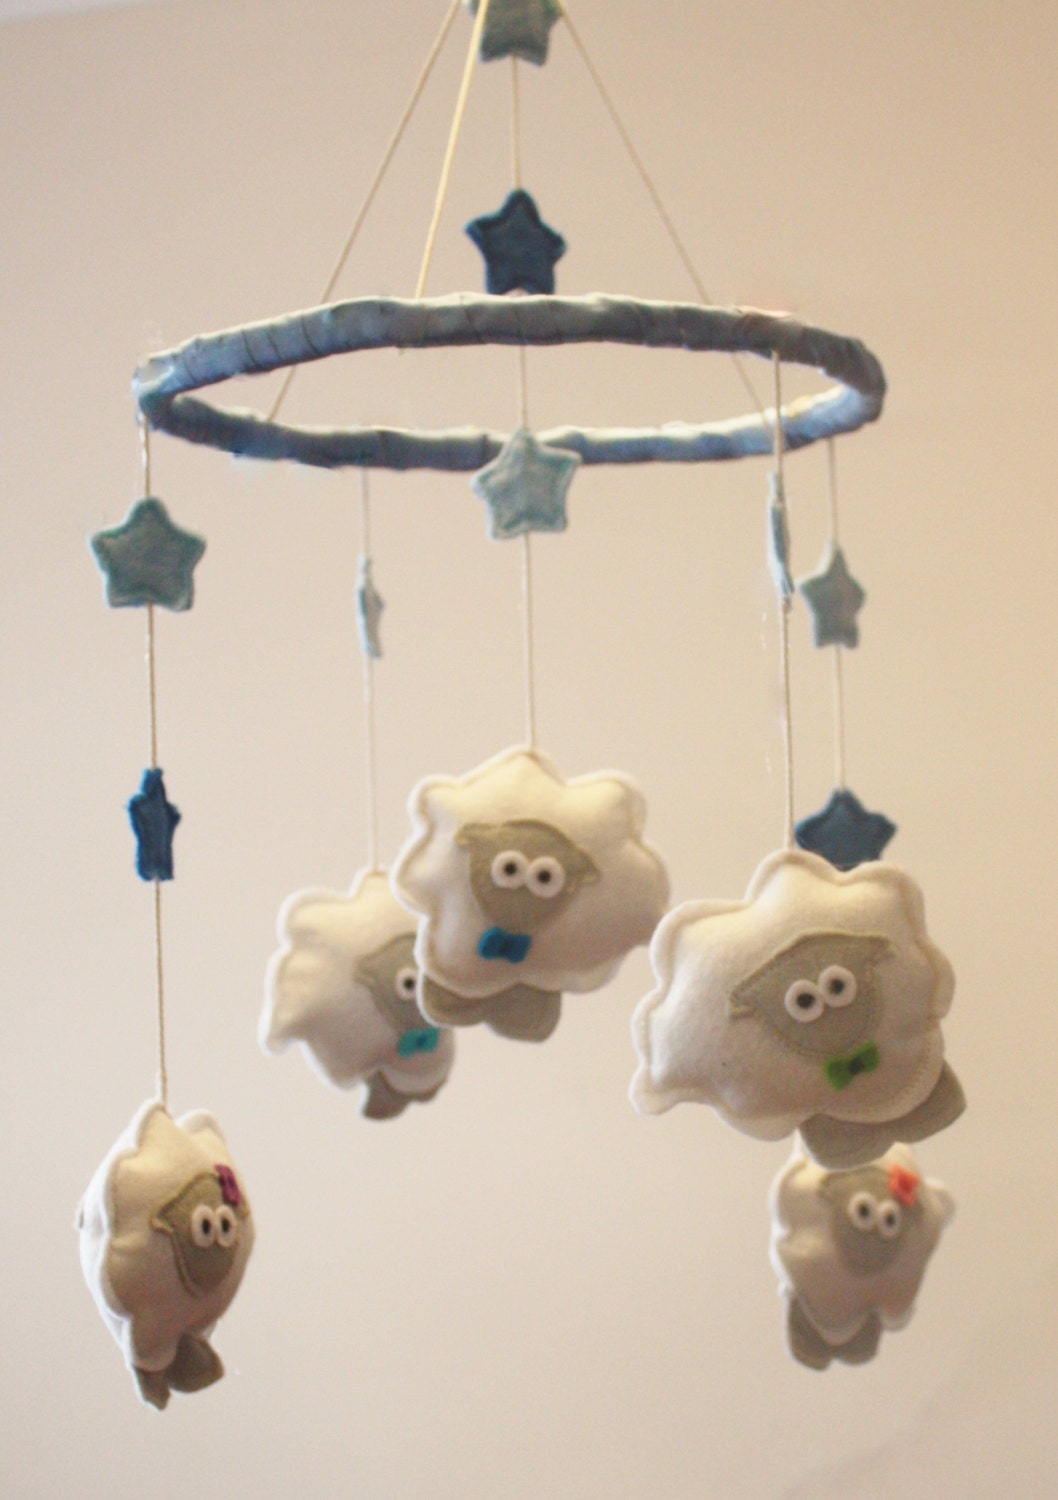 Counting Sheep Cot Mobile- Baby room decor, crib mobile, sheep decor, new baby gift, modern nursery - ButtonOwlBoutique